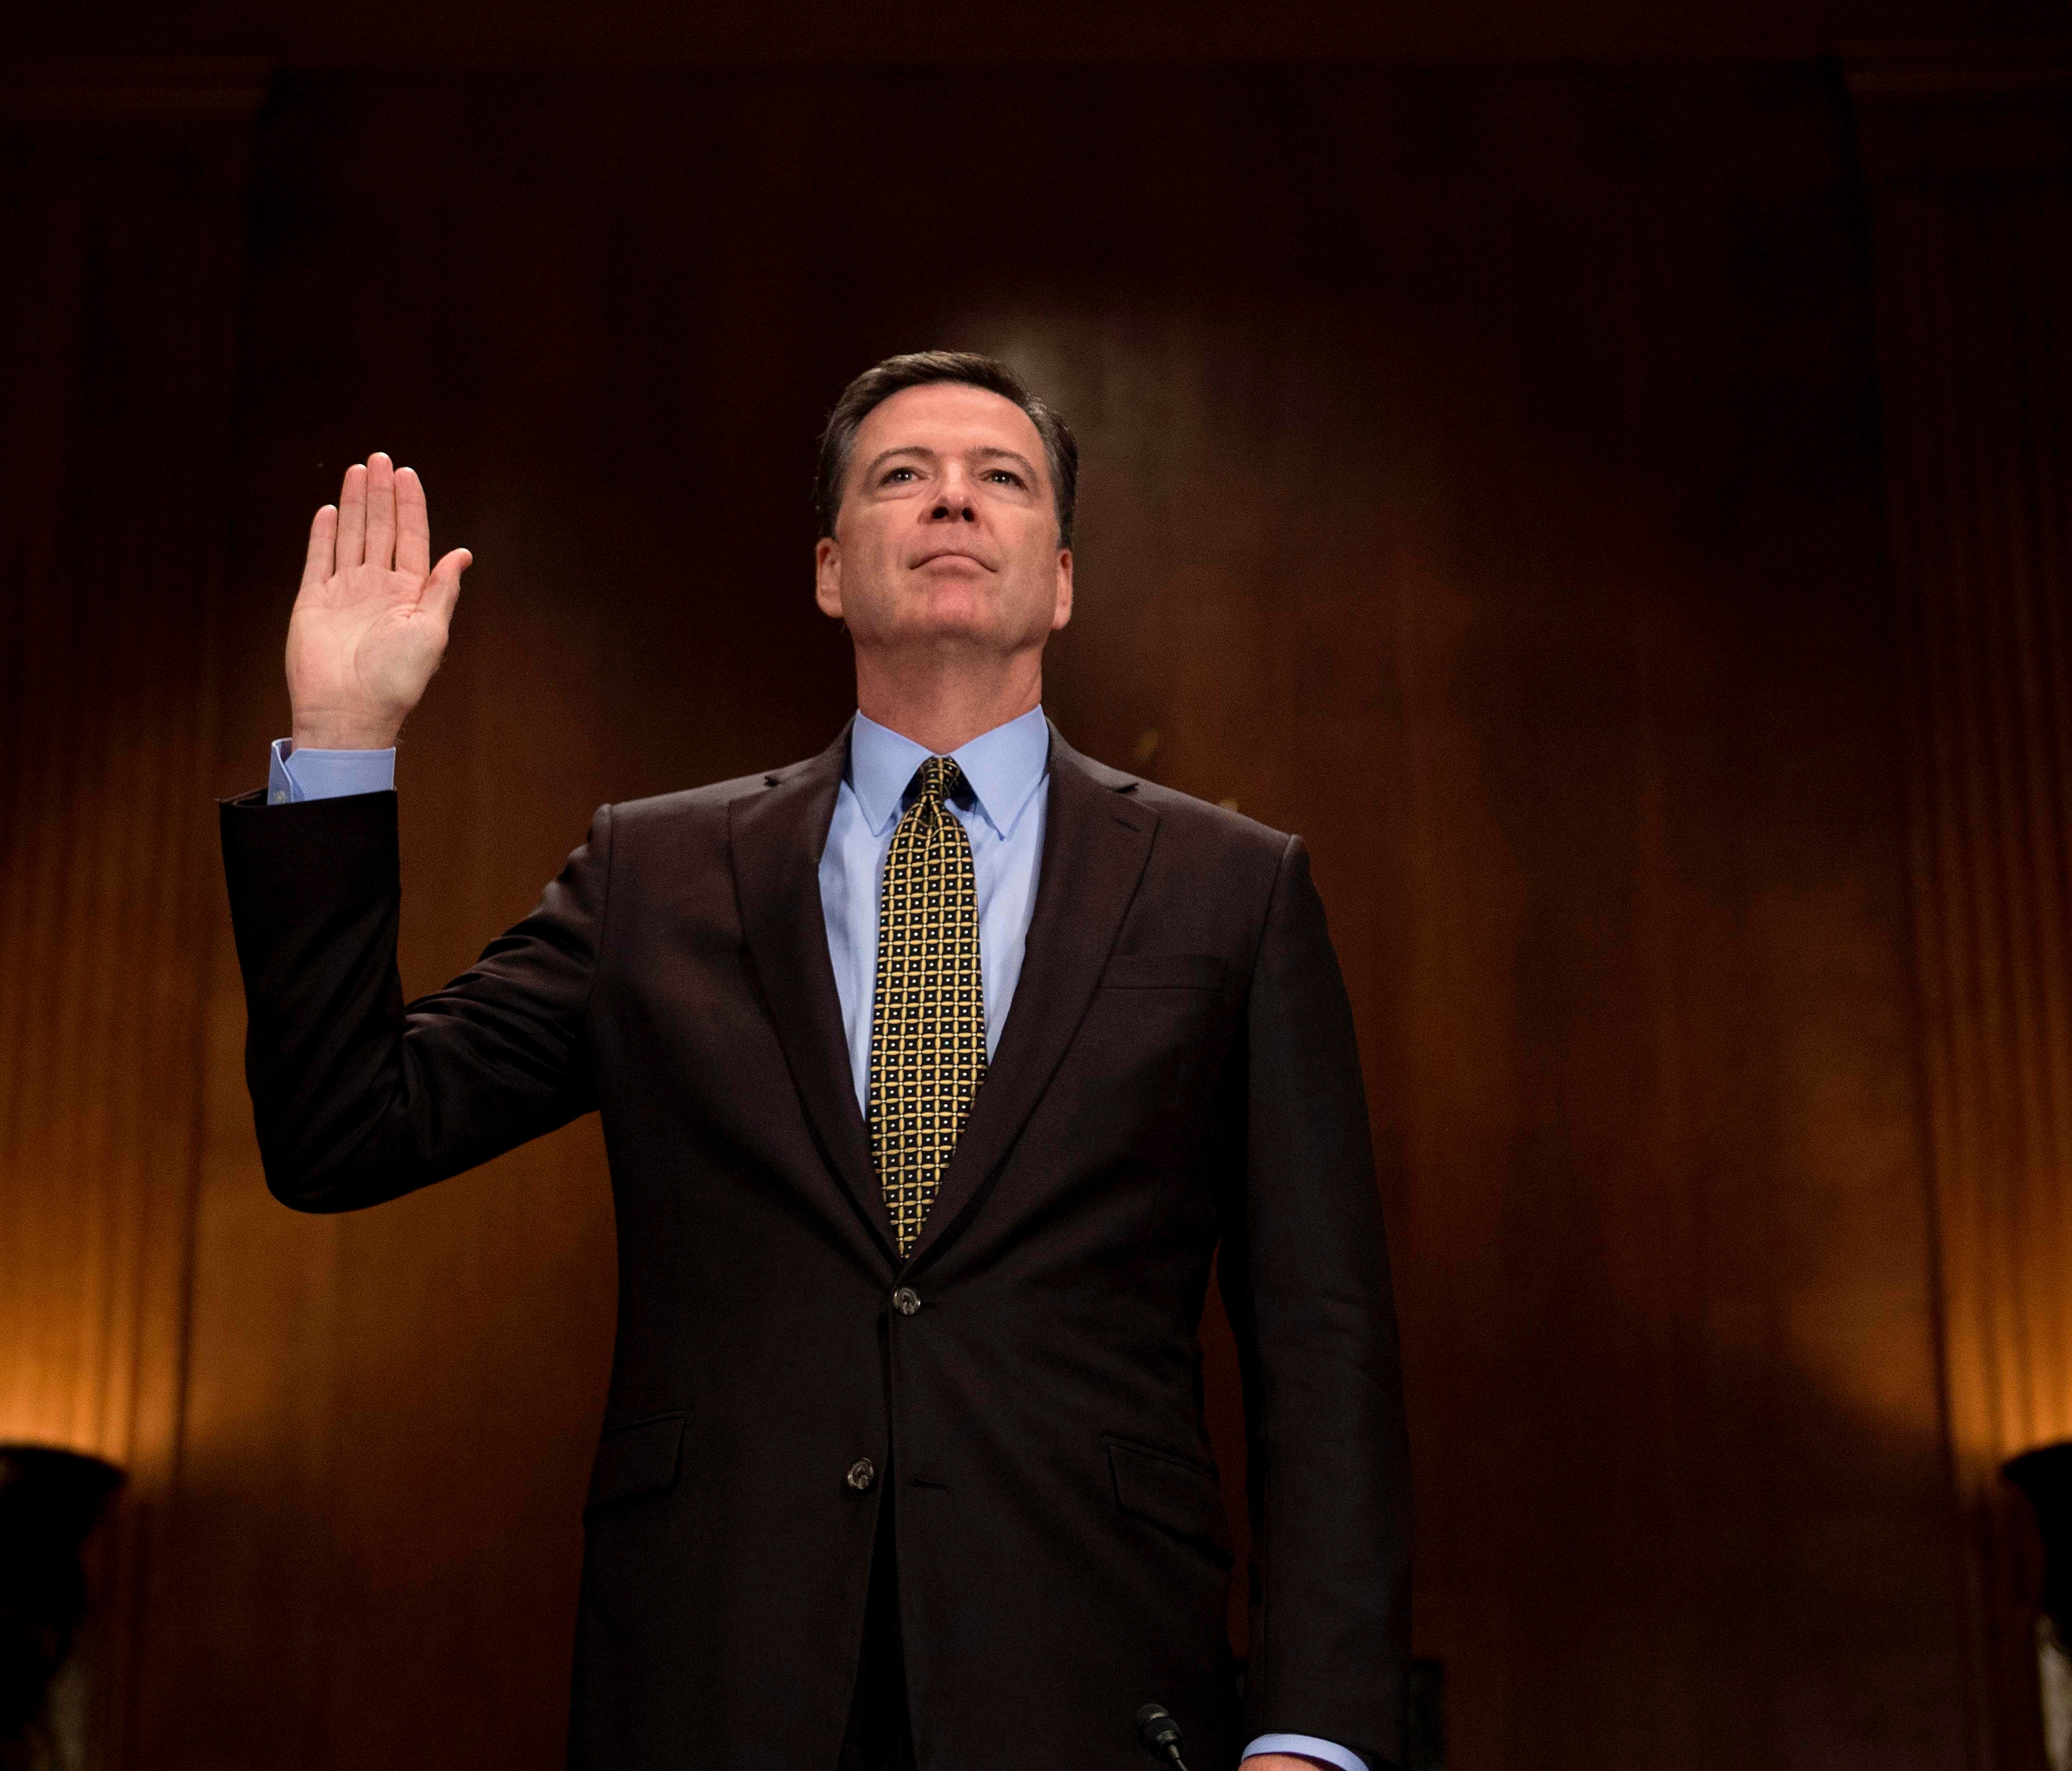 James Comey is sworn in prior to testifying before the Senate Judiciary Committee on May 3, 2017.